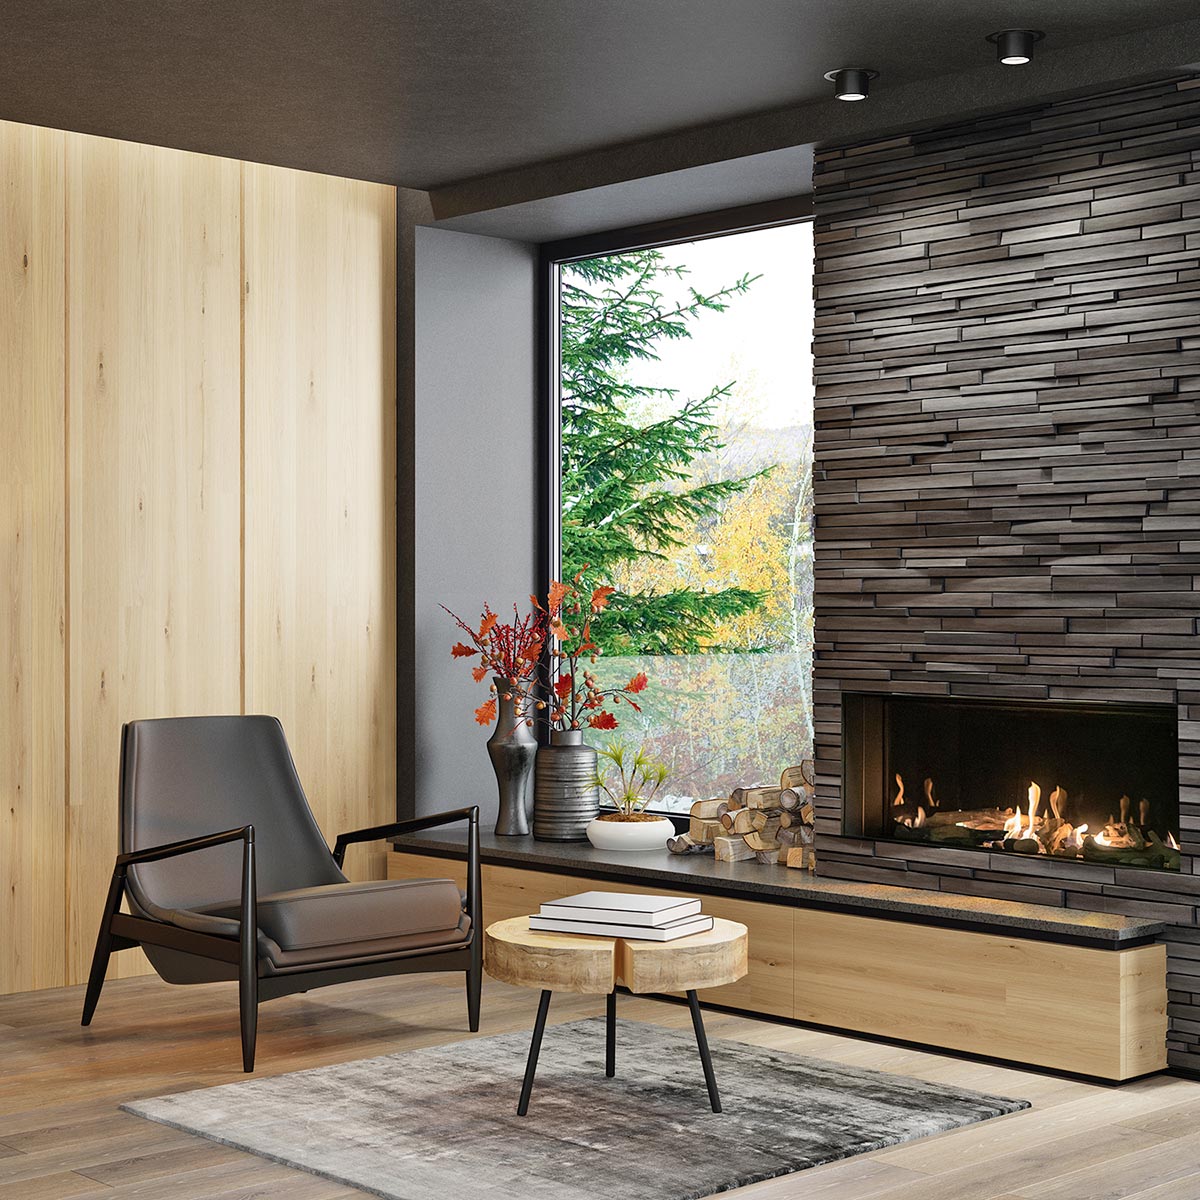 Sierra Flame Vienna Direct Vent Linear Gas Fireplace - Natural Gas or Liquid Propane- Lifestyle Living Room With Brick Wall Electric Fireplace